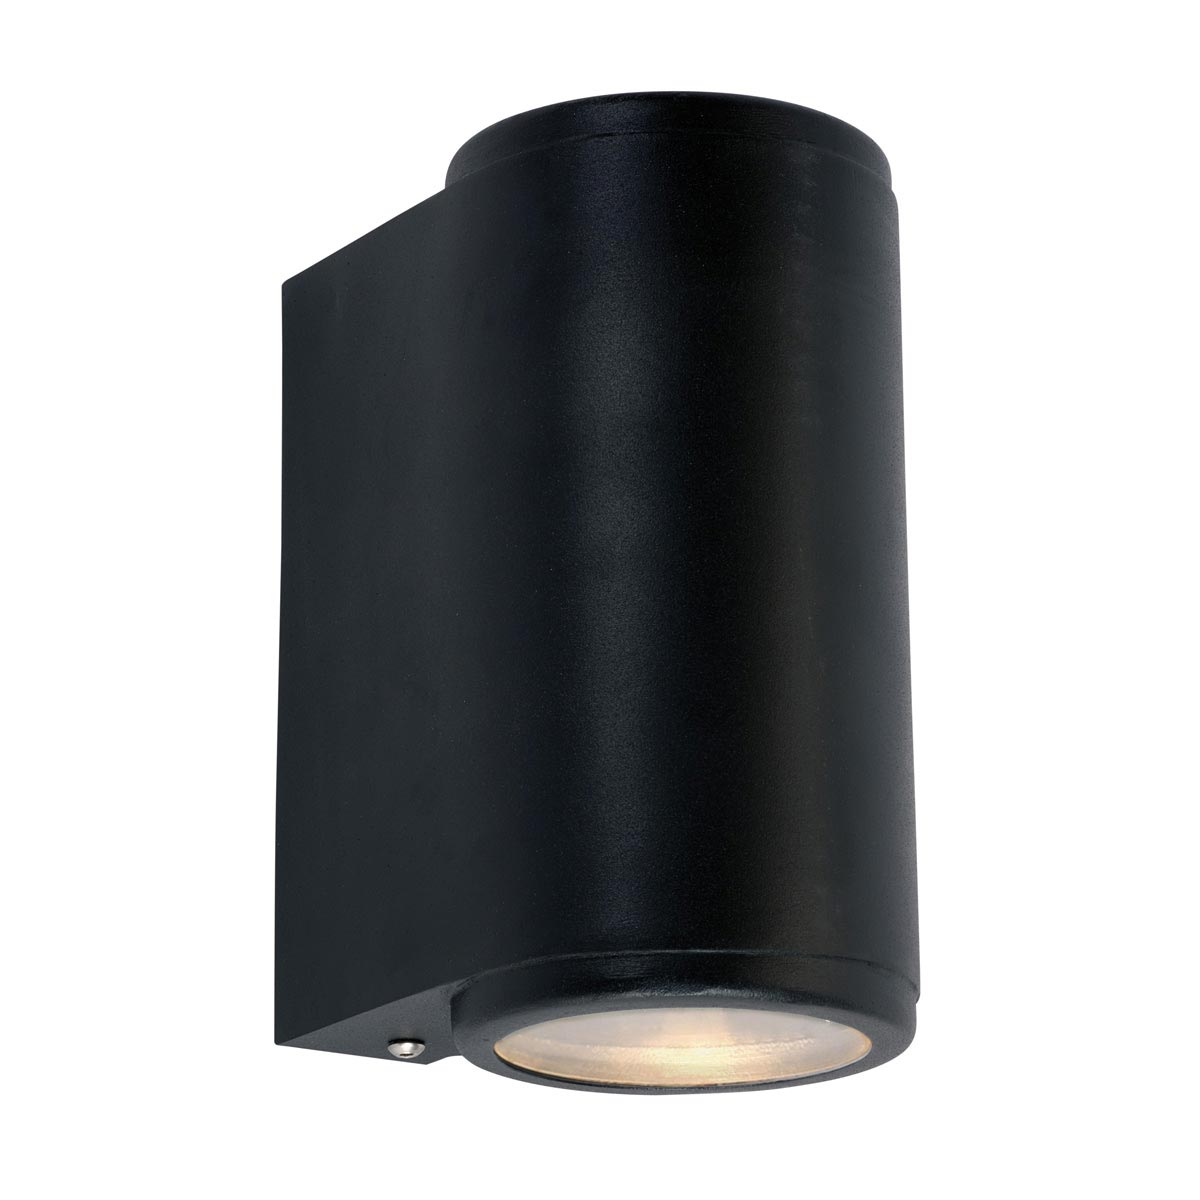 Norlys Mandal 2 Light Galvanised Outdoor Wall Up Down Light Black IP44